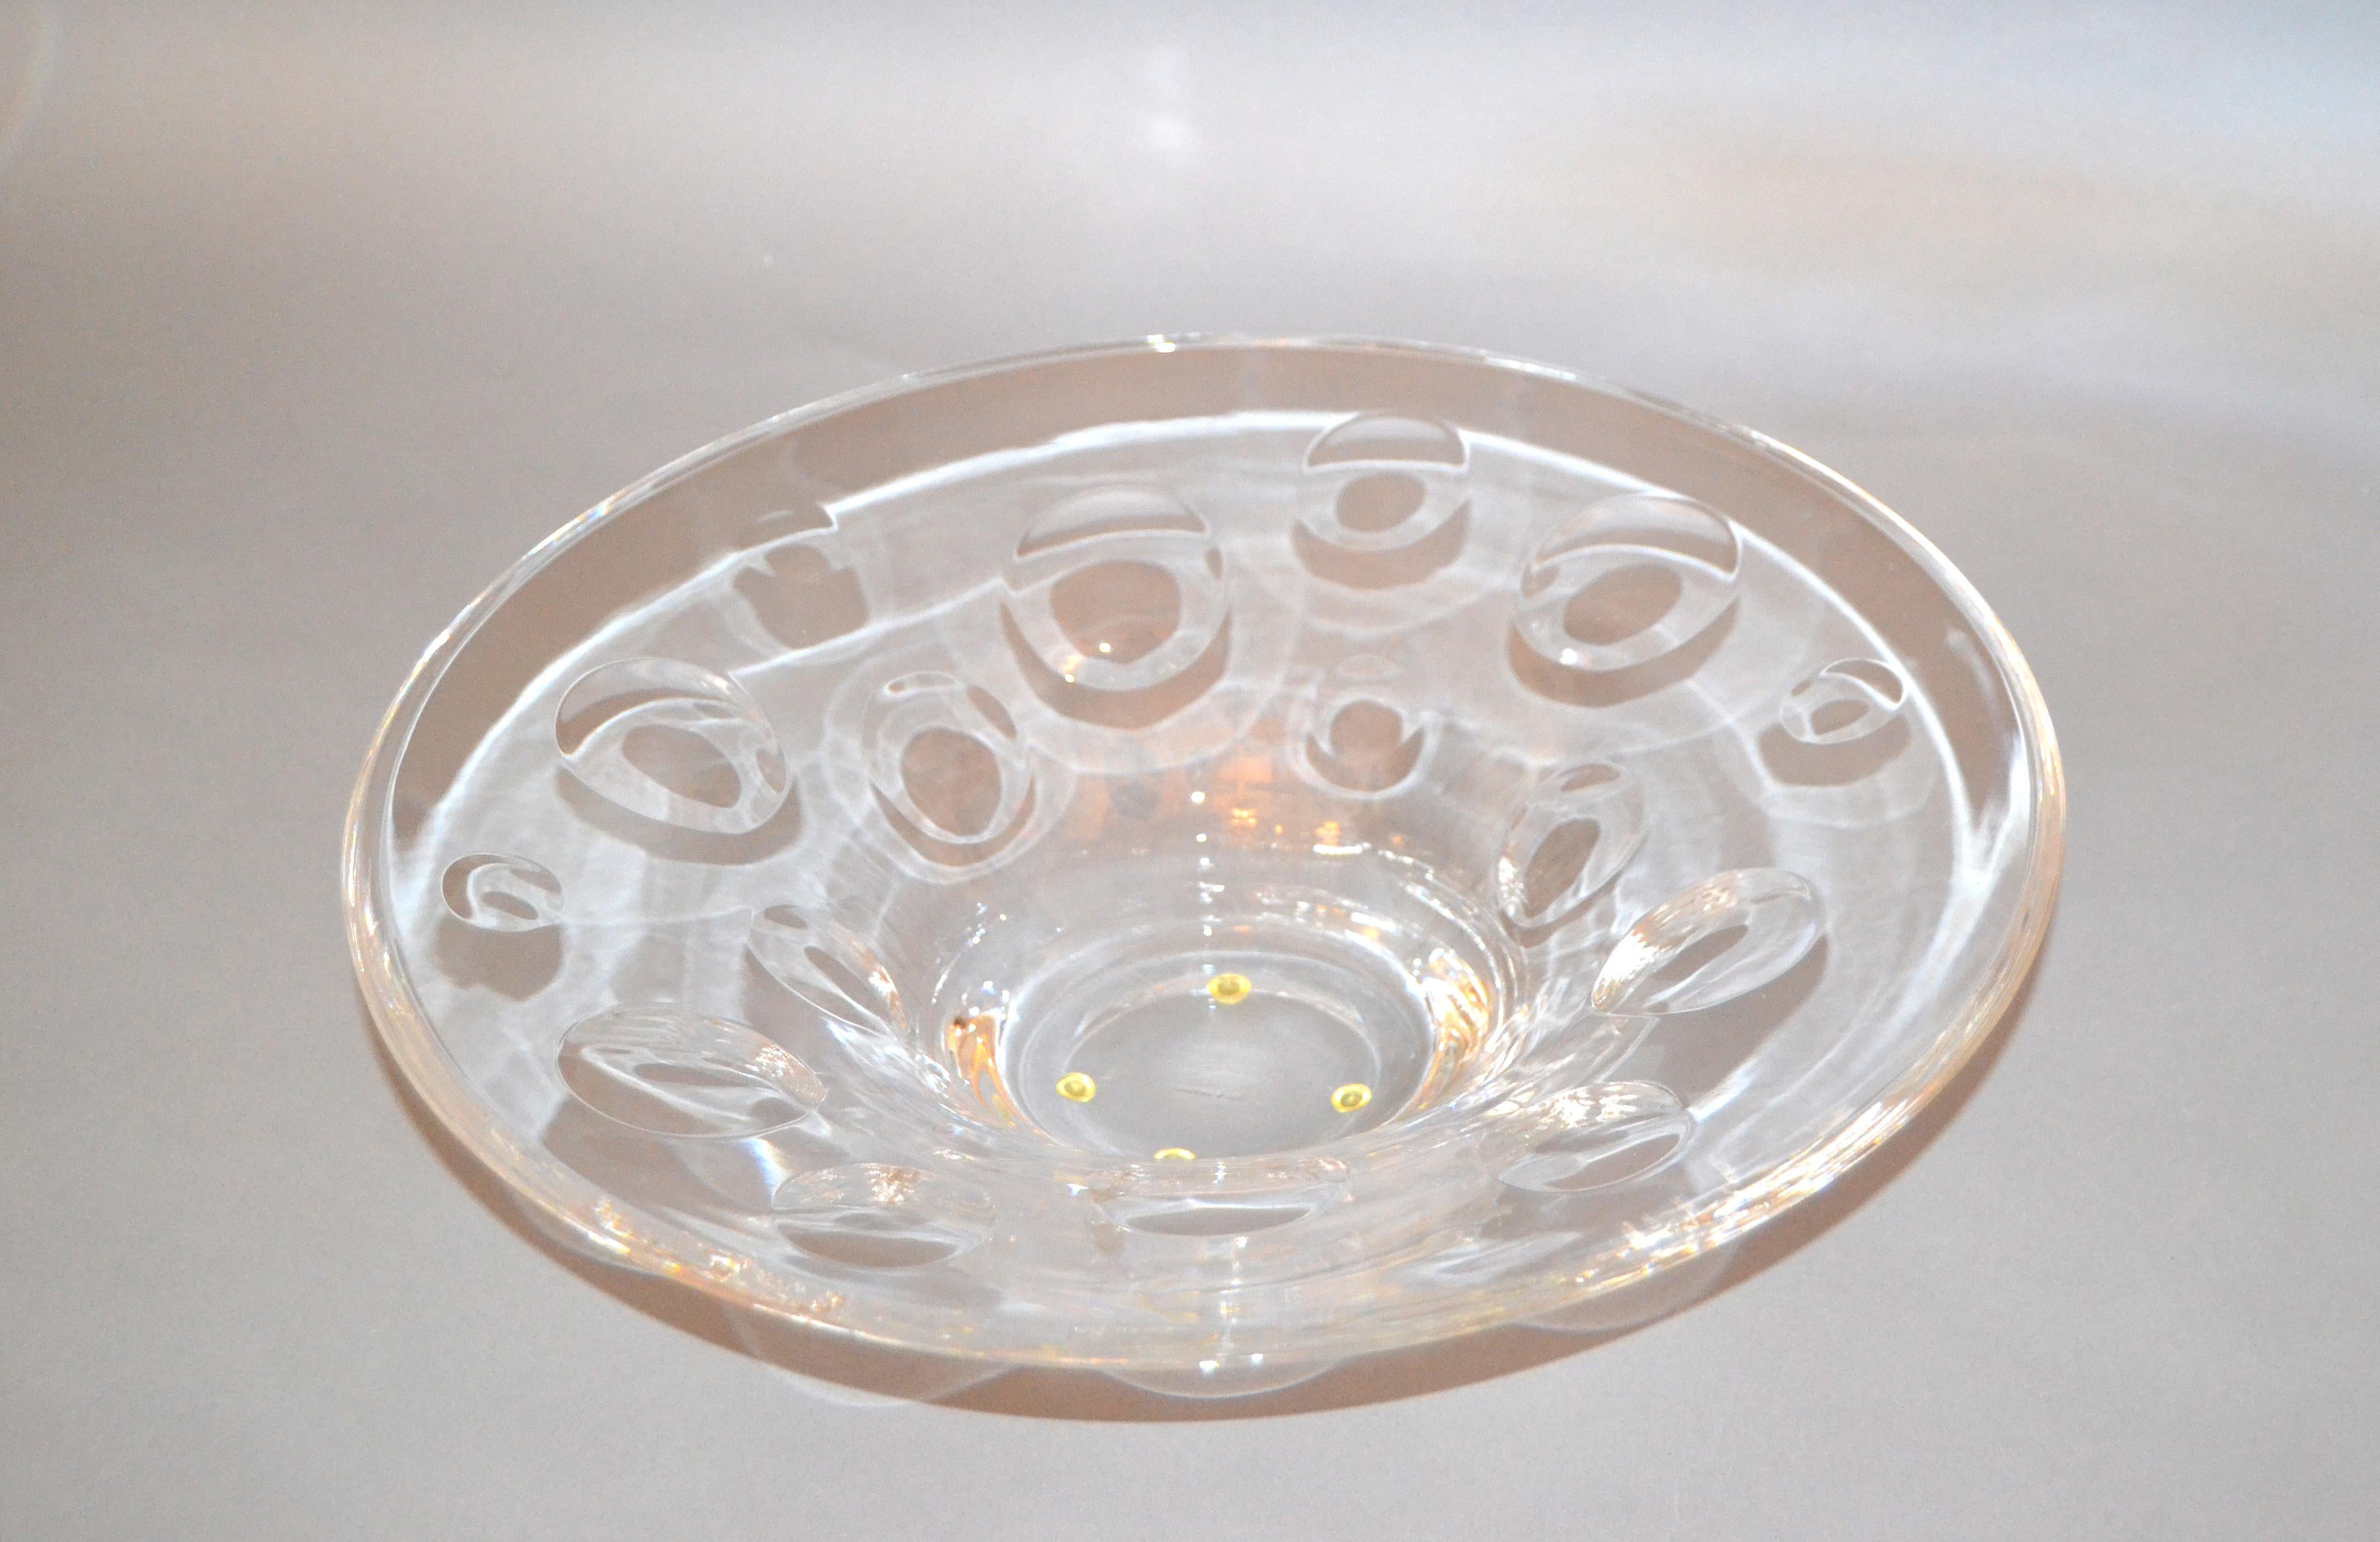 1940s Art Deco Large Tiffany & Company Art Glass Crystal Bowl with Bubbles 1